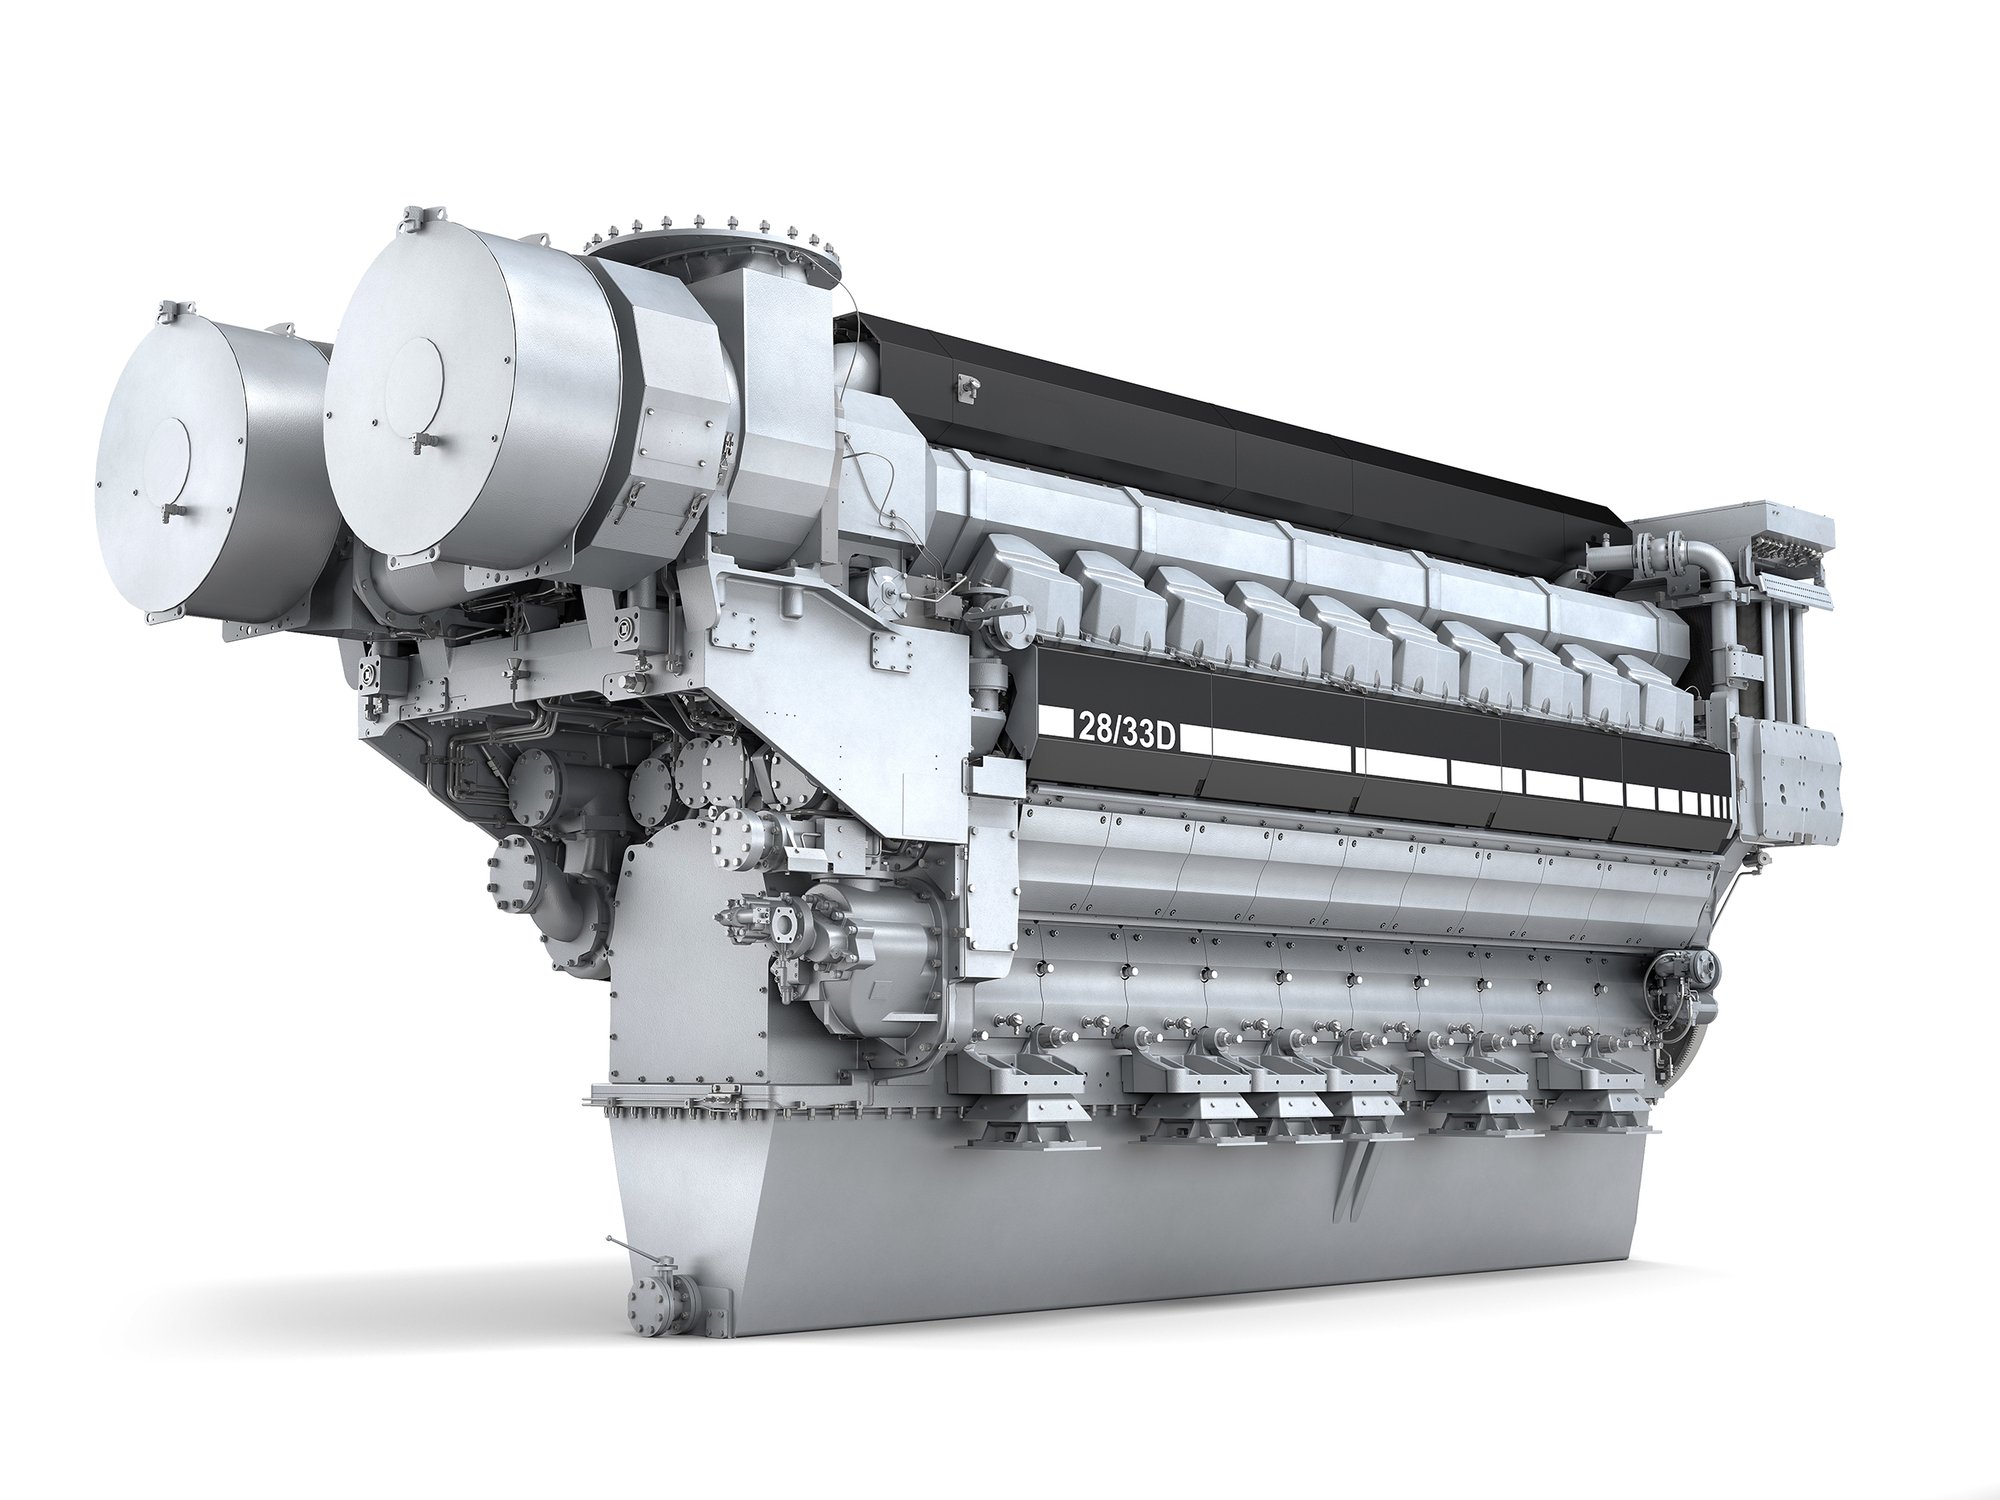 Engines and Power Systems, Naval Engines